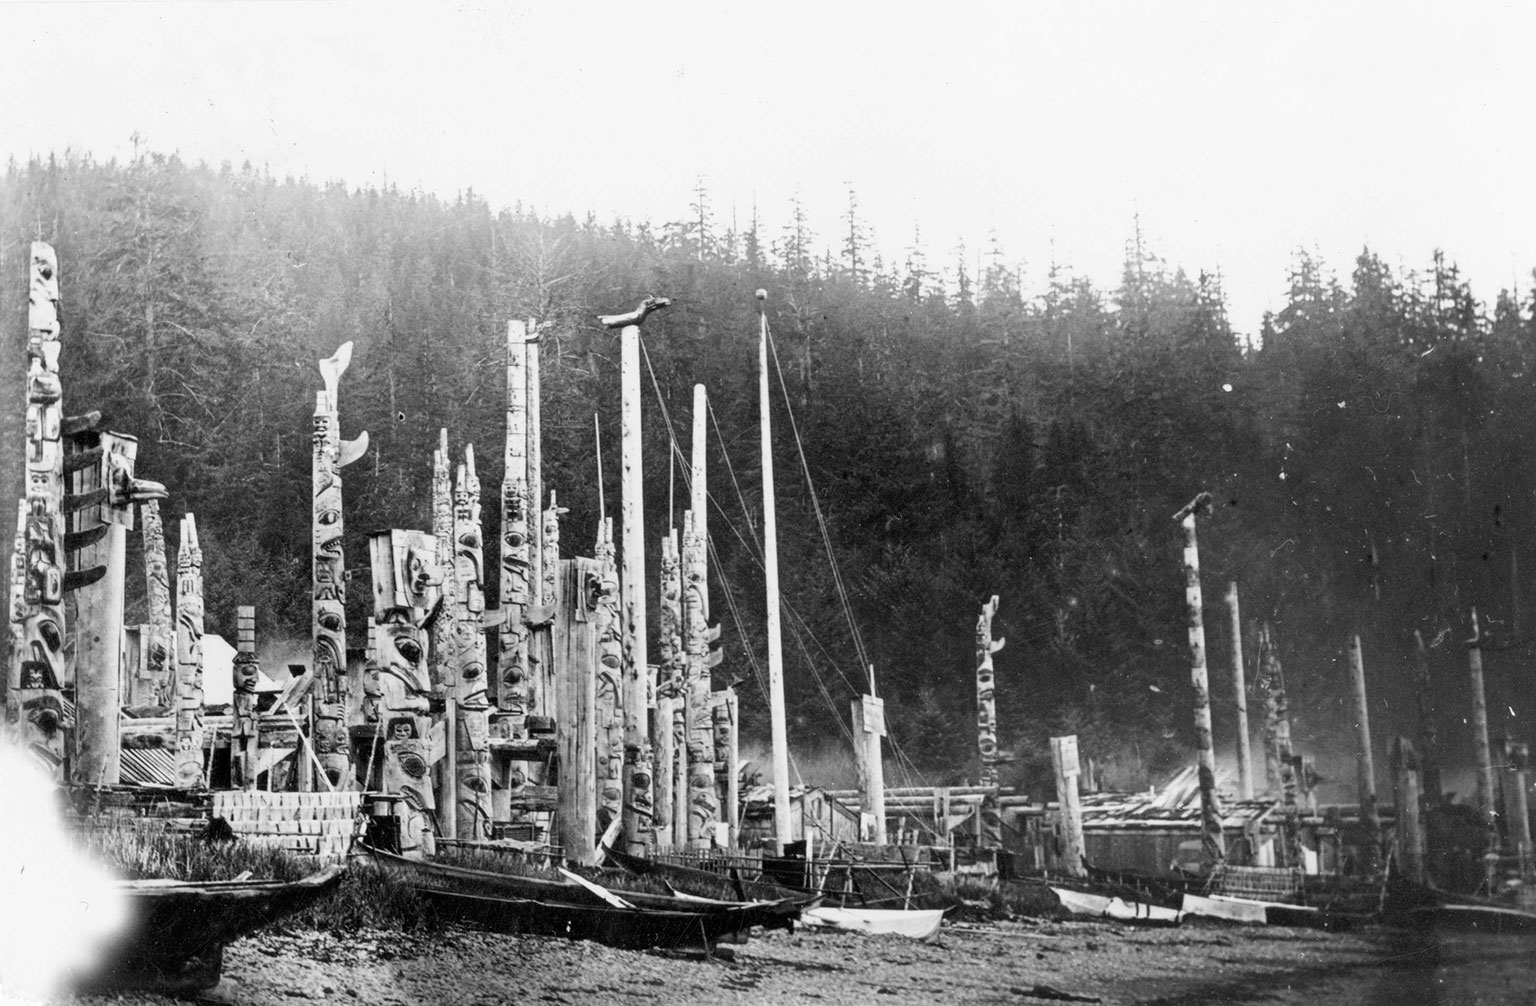 Image courtesy of the Royal BC Museum and Archives